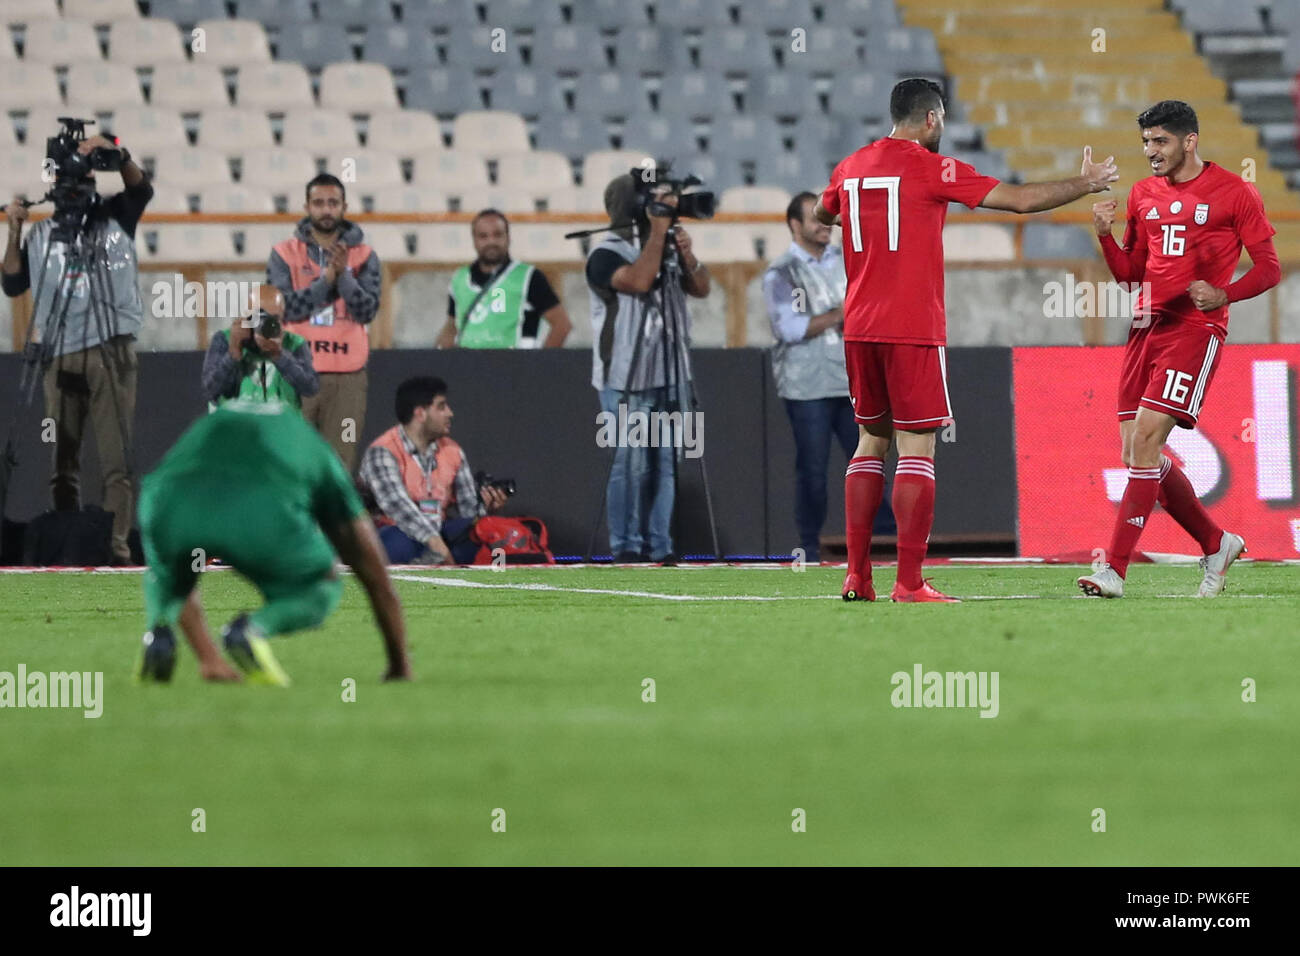 Tehran, Iran. 16th Oct, 2018. Iran's Mehdi Torabi (R) celebrates scoring his side's second goal with teammate Mehdi Taremi during an International Friendly soccer match between Iran and Bolivia at the Azadi Stadium. The Iranian authorities have allowed women to attend the match after a request from the Football Federation of the Islamic Republic of Iran. Credit: Saeid Zareian/dpa/Alamy Live News Stock Photo